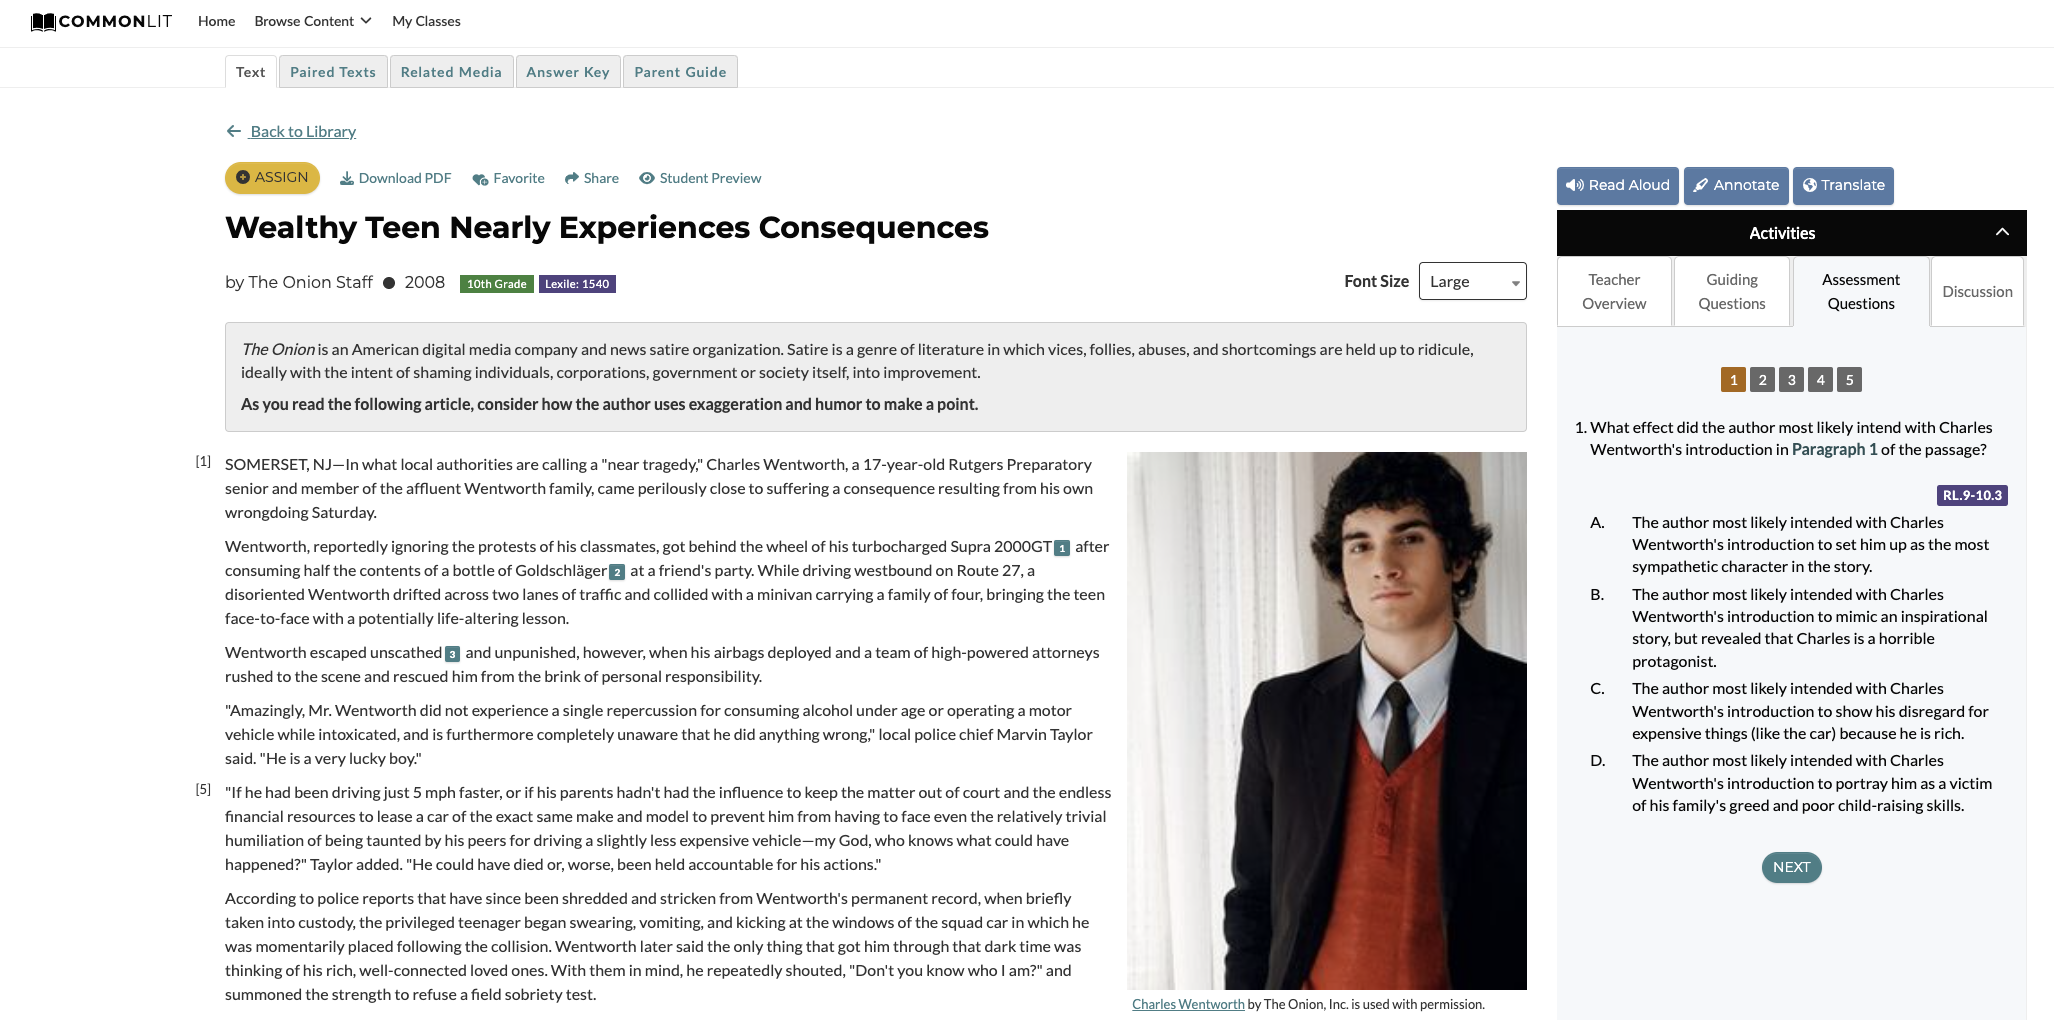 A screenshot of the text "Wealthy Teen Nearly Experiences Consequences."